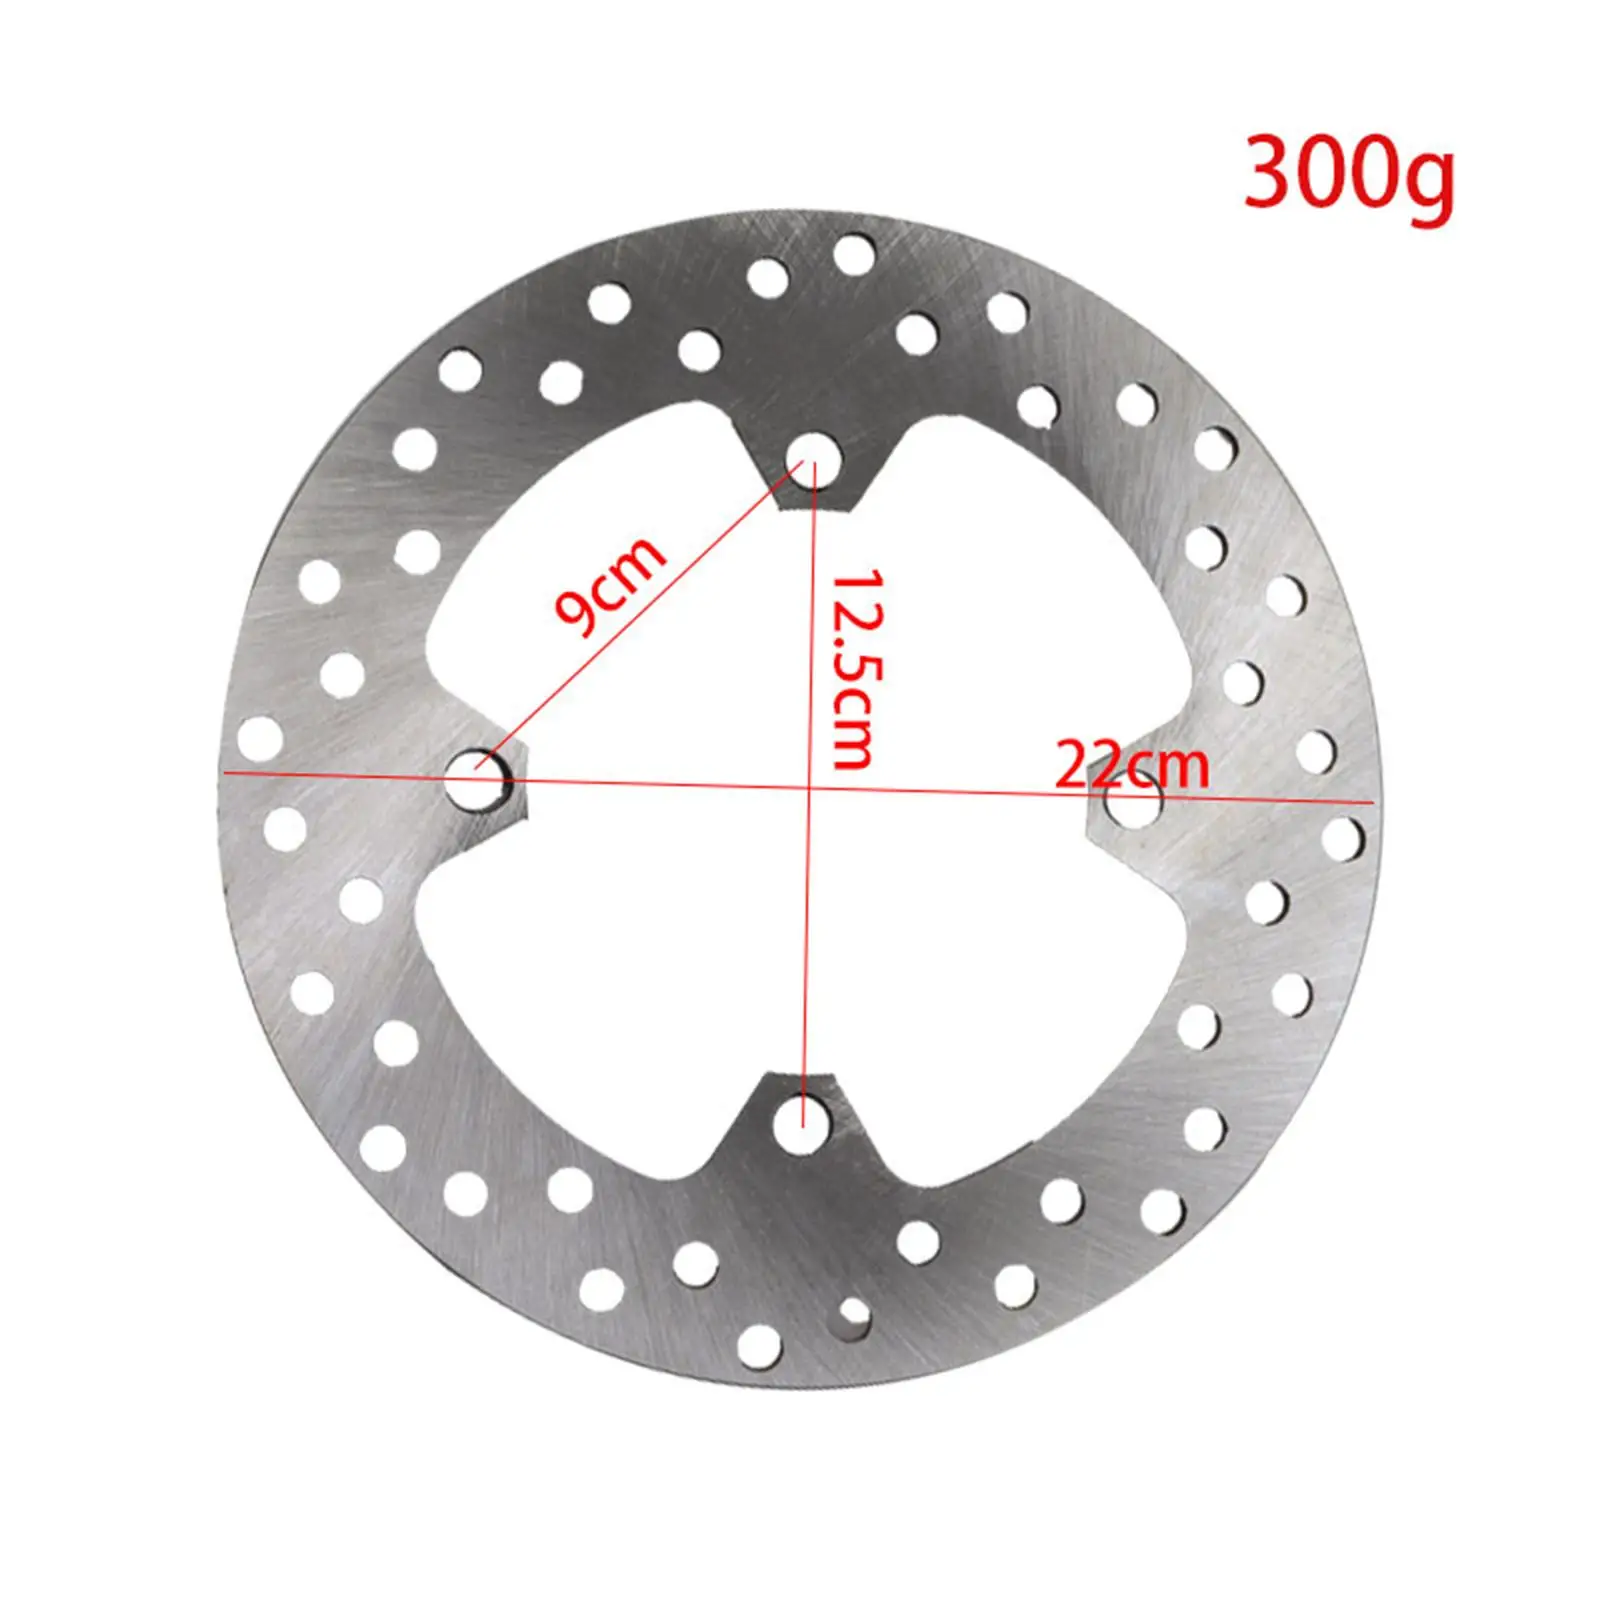 Motorcycle Brake Disc Rotor Replacement Durable Easy Installation Professional Spare Parts for Honda XR600R XR400 TRX400x